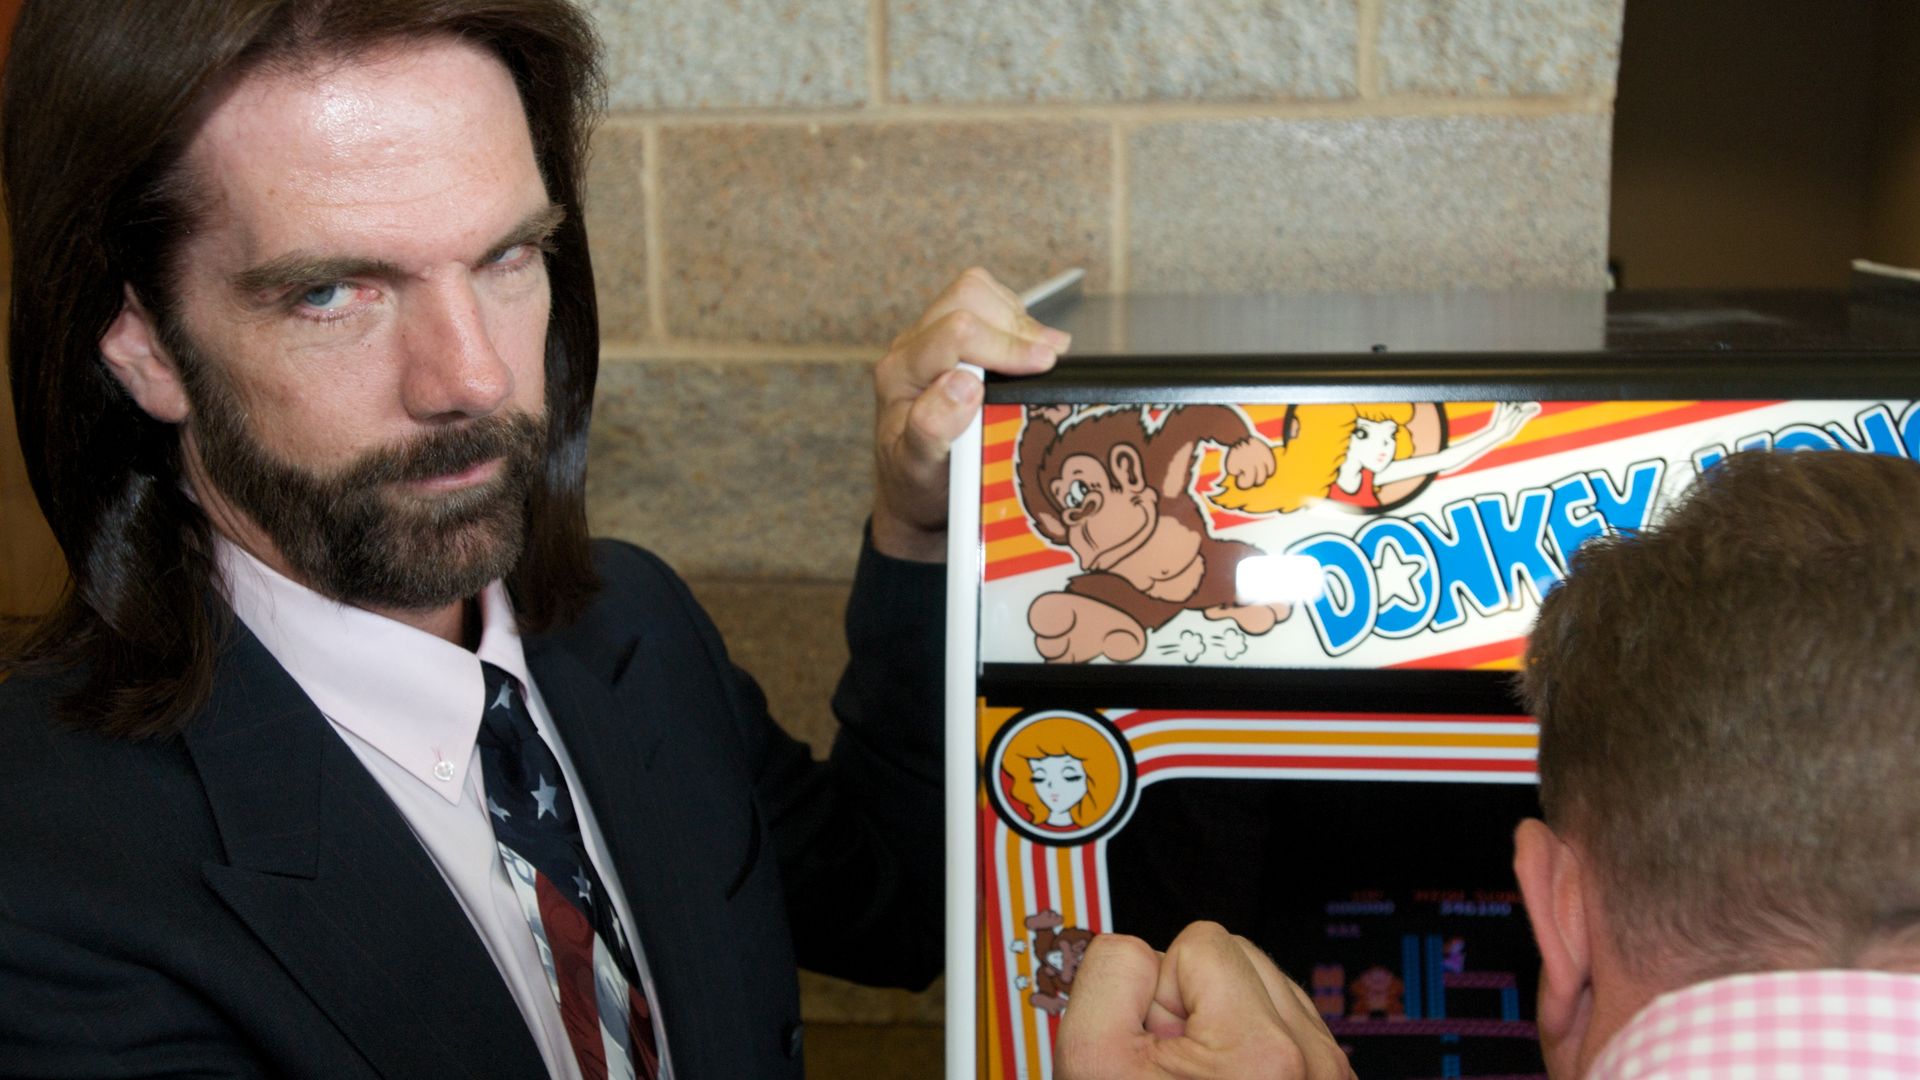 Photo of a man in a suit making a fist while he stands next to a Donkey Kong machine